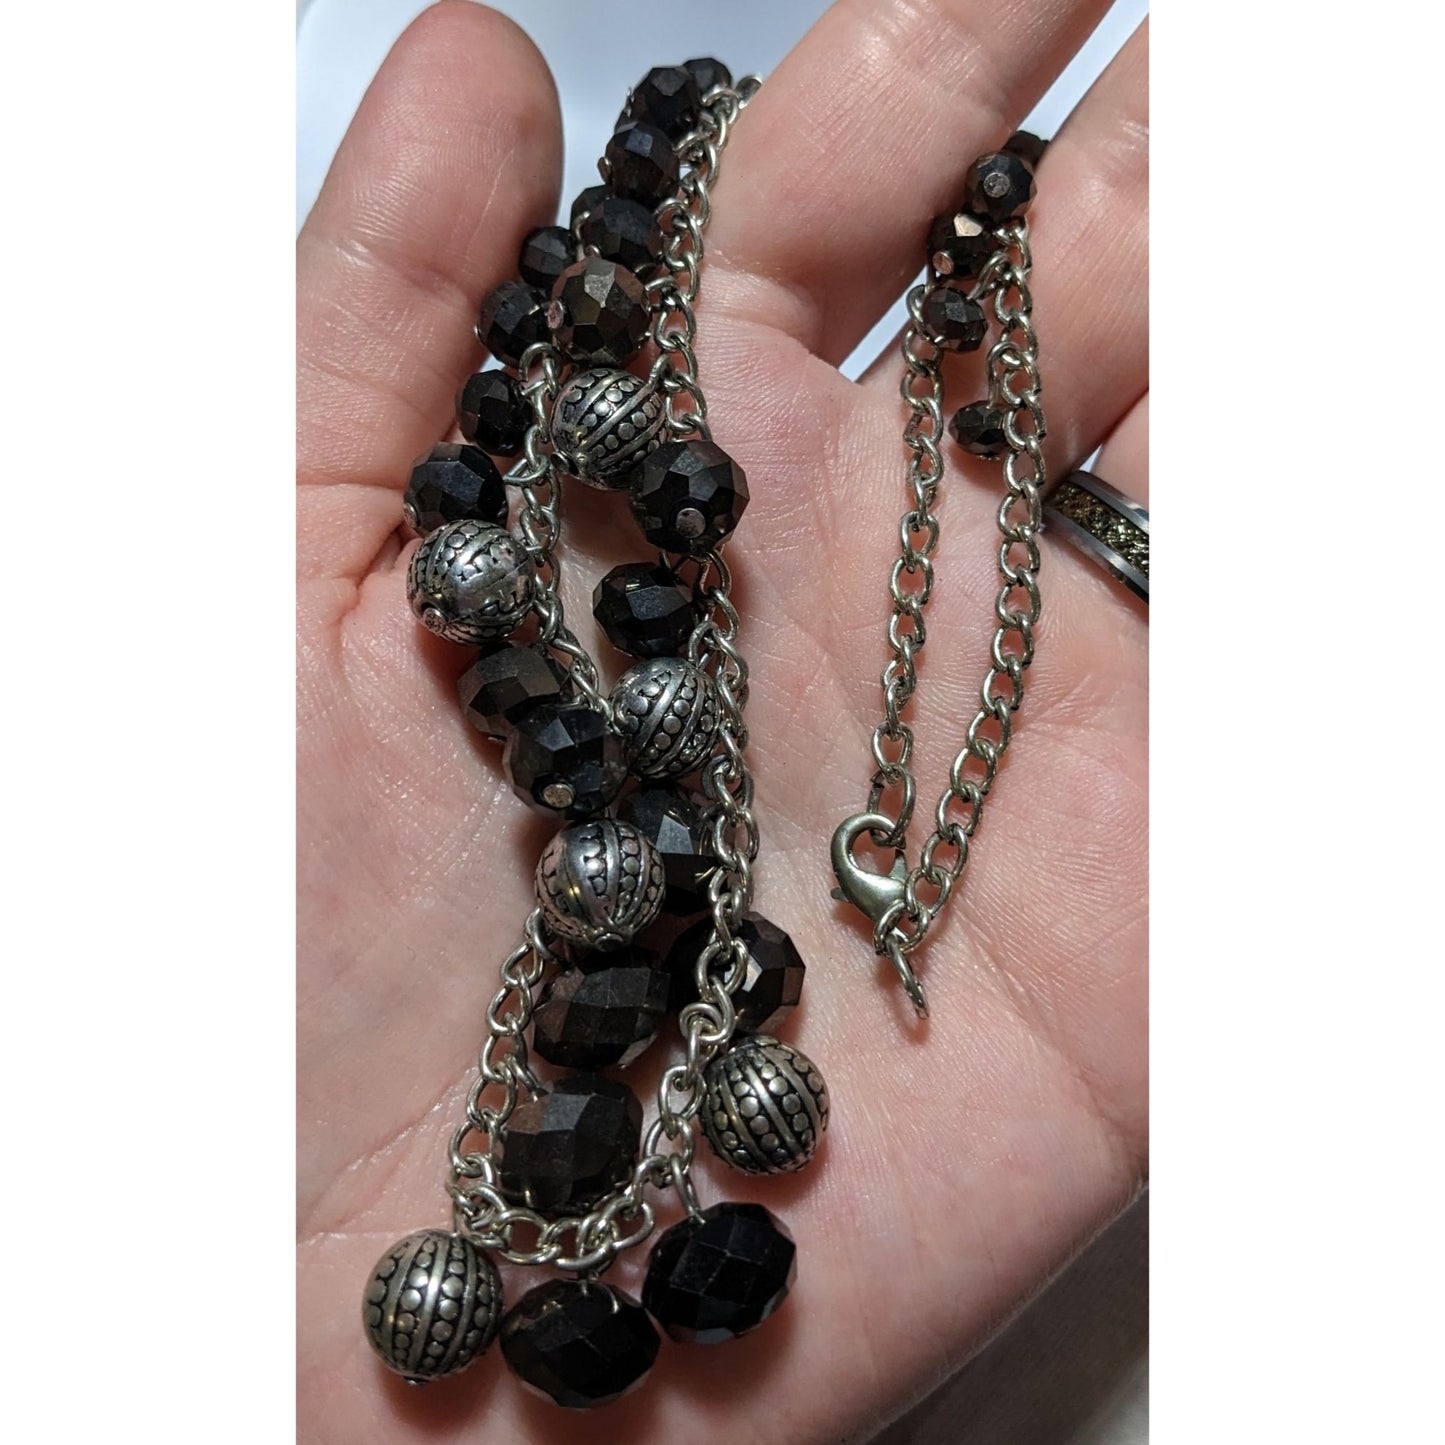 Black And Silver Beaded Charm Necklace